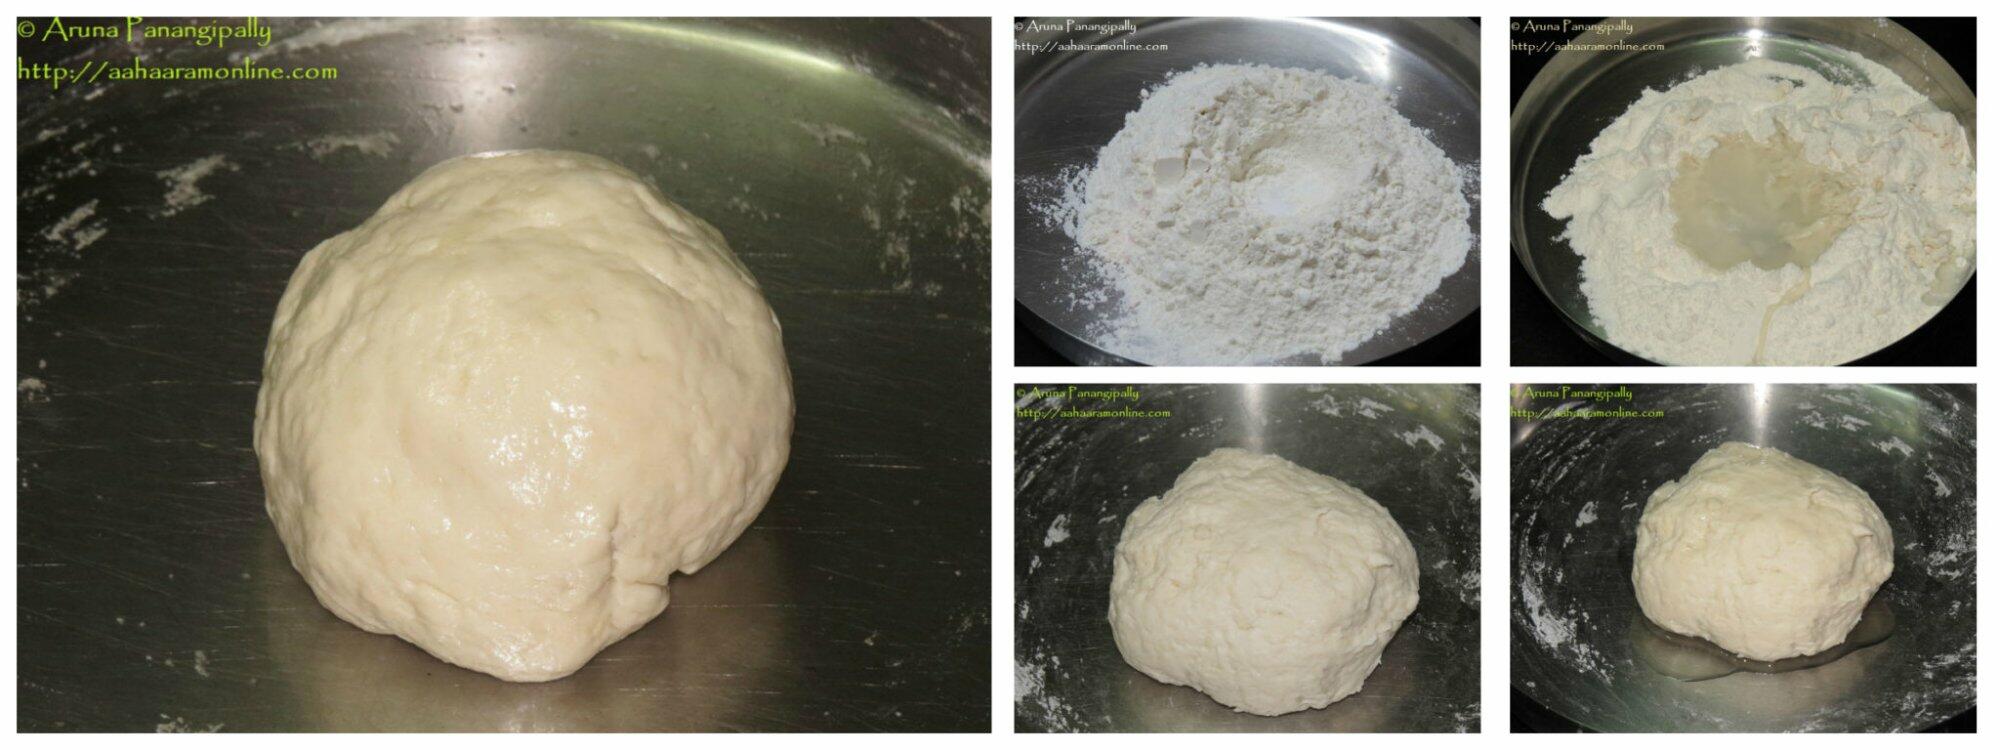 Step-by-step procedure for making the Sojjappalu dough